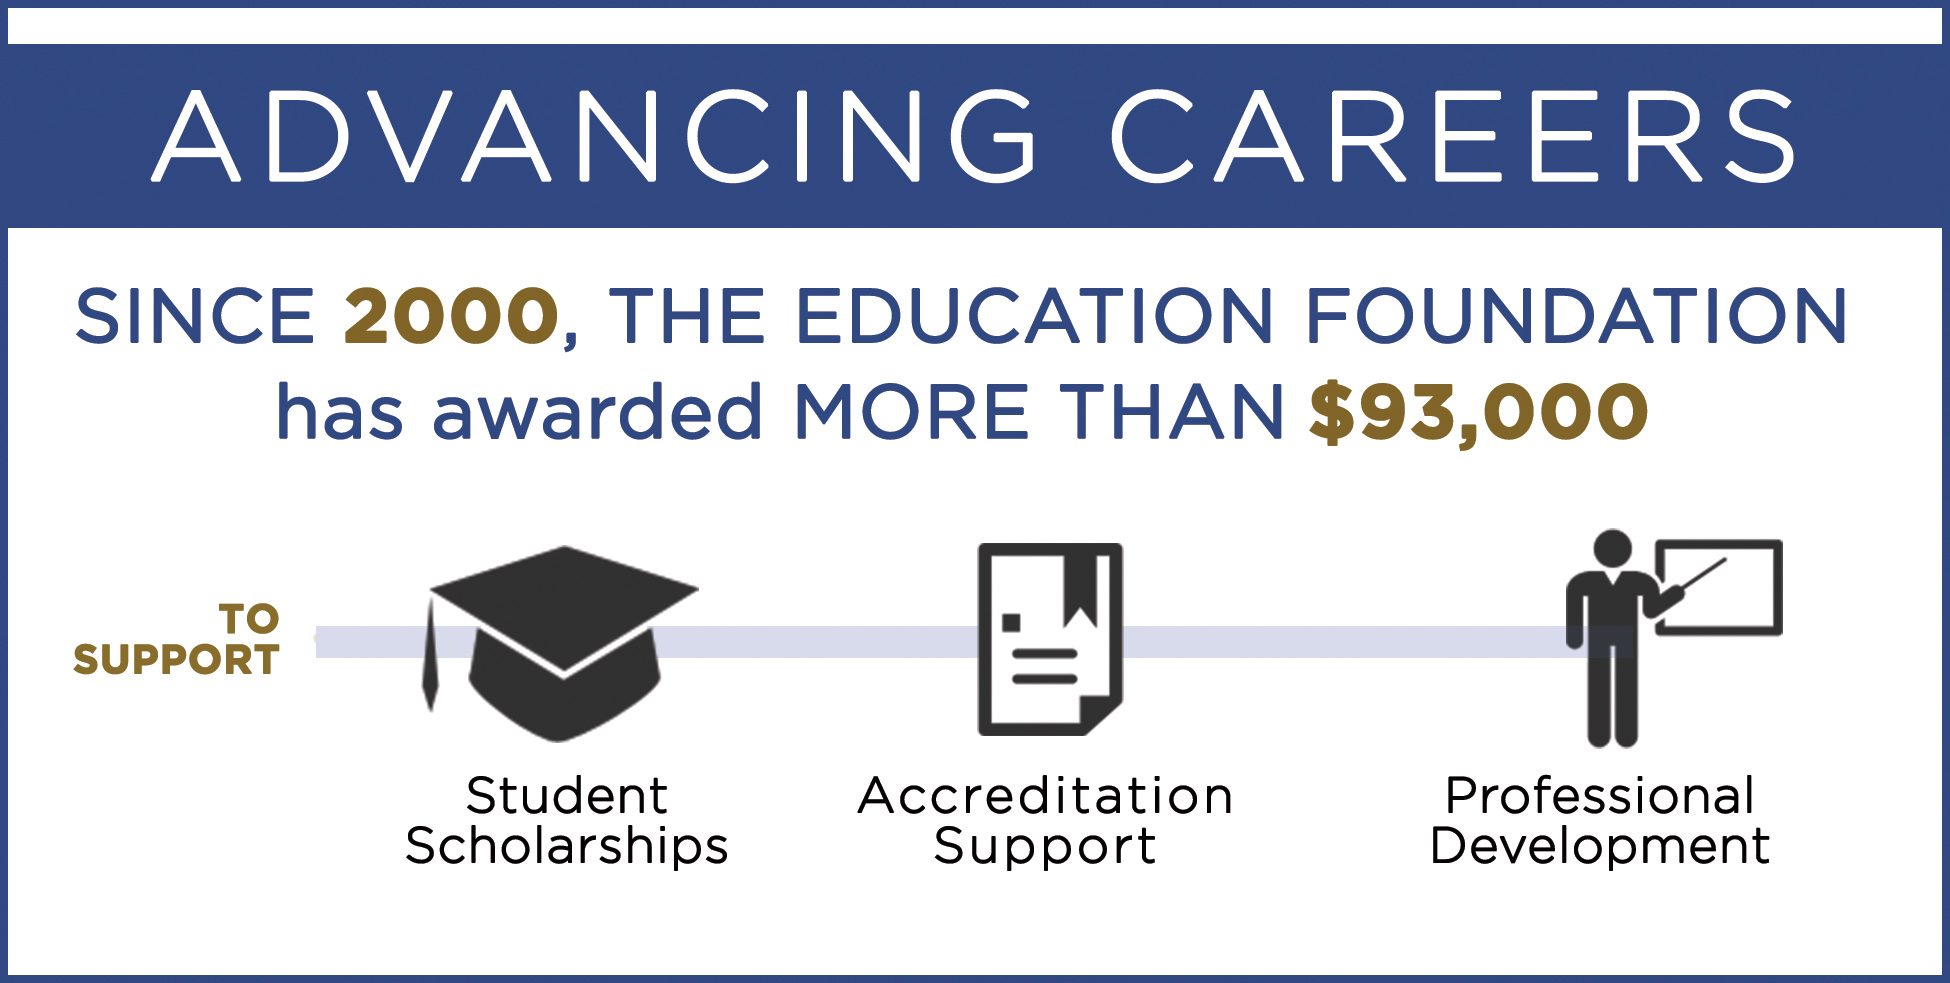 FPREF Infographic, Advancing Career: Since 2000, the Education Foundation has awarded MORE THAN $93,000 to support Student Scholarships, Accreditation Support, and Professional Development